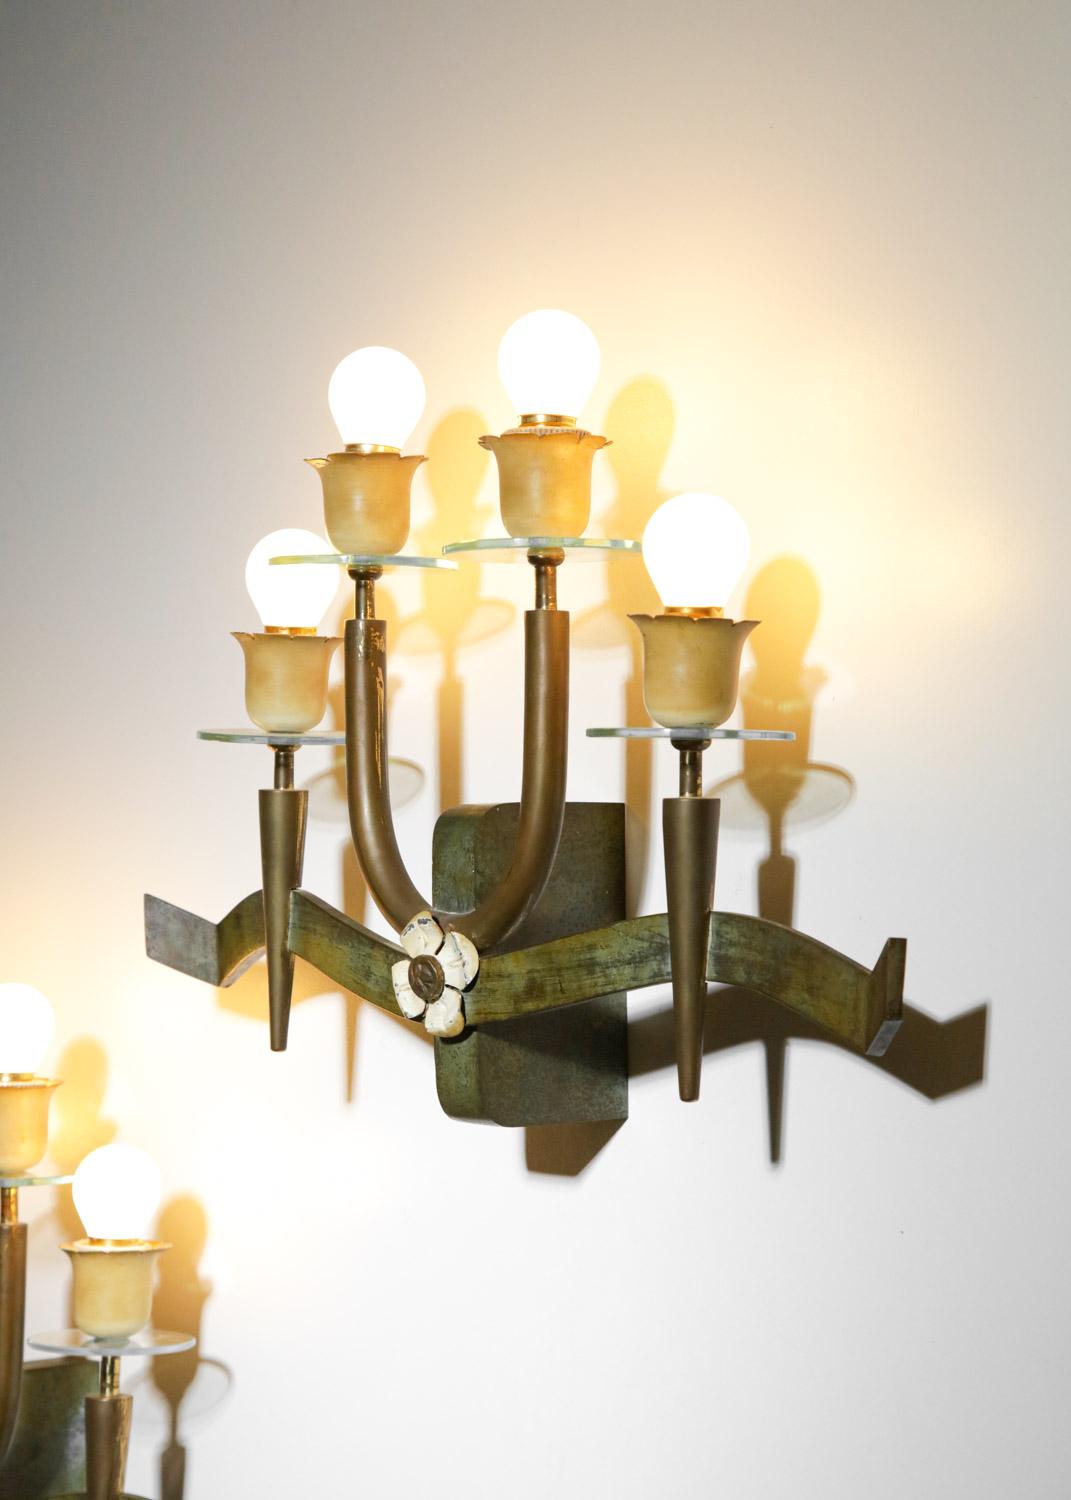 Big pair of italian sconces from the 60s. Structure of the arms and the base n lacquered metal and disc of transparent glasses. Very nice vintage condition of the sconces with an original and very decorative design. Nice patina of time on the whole